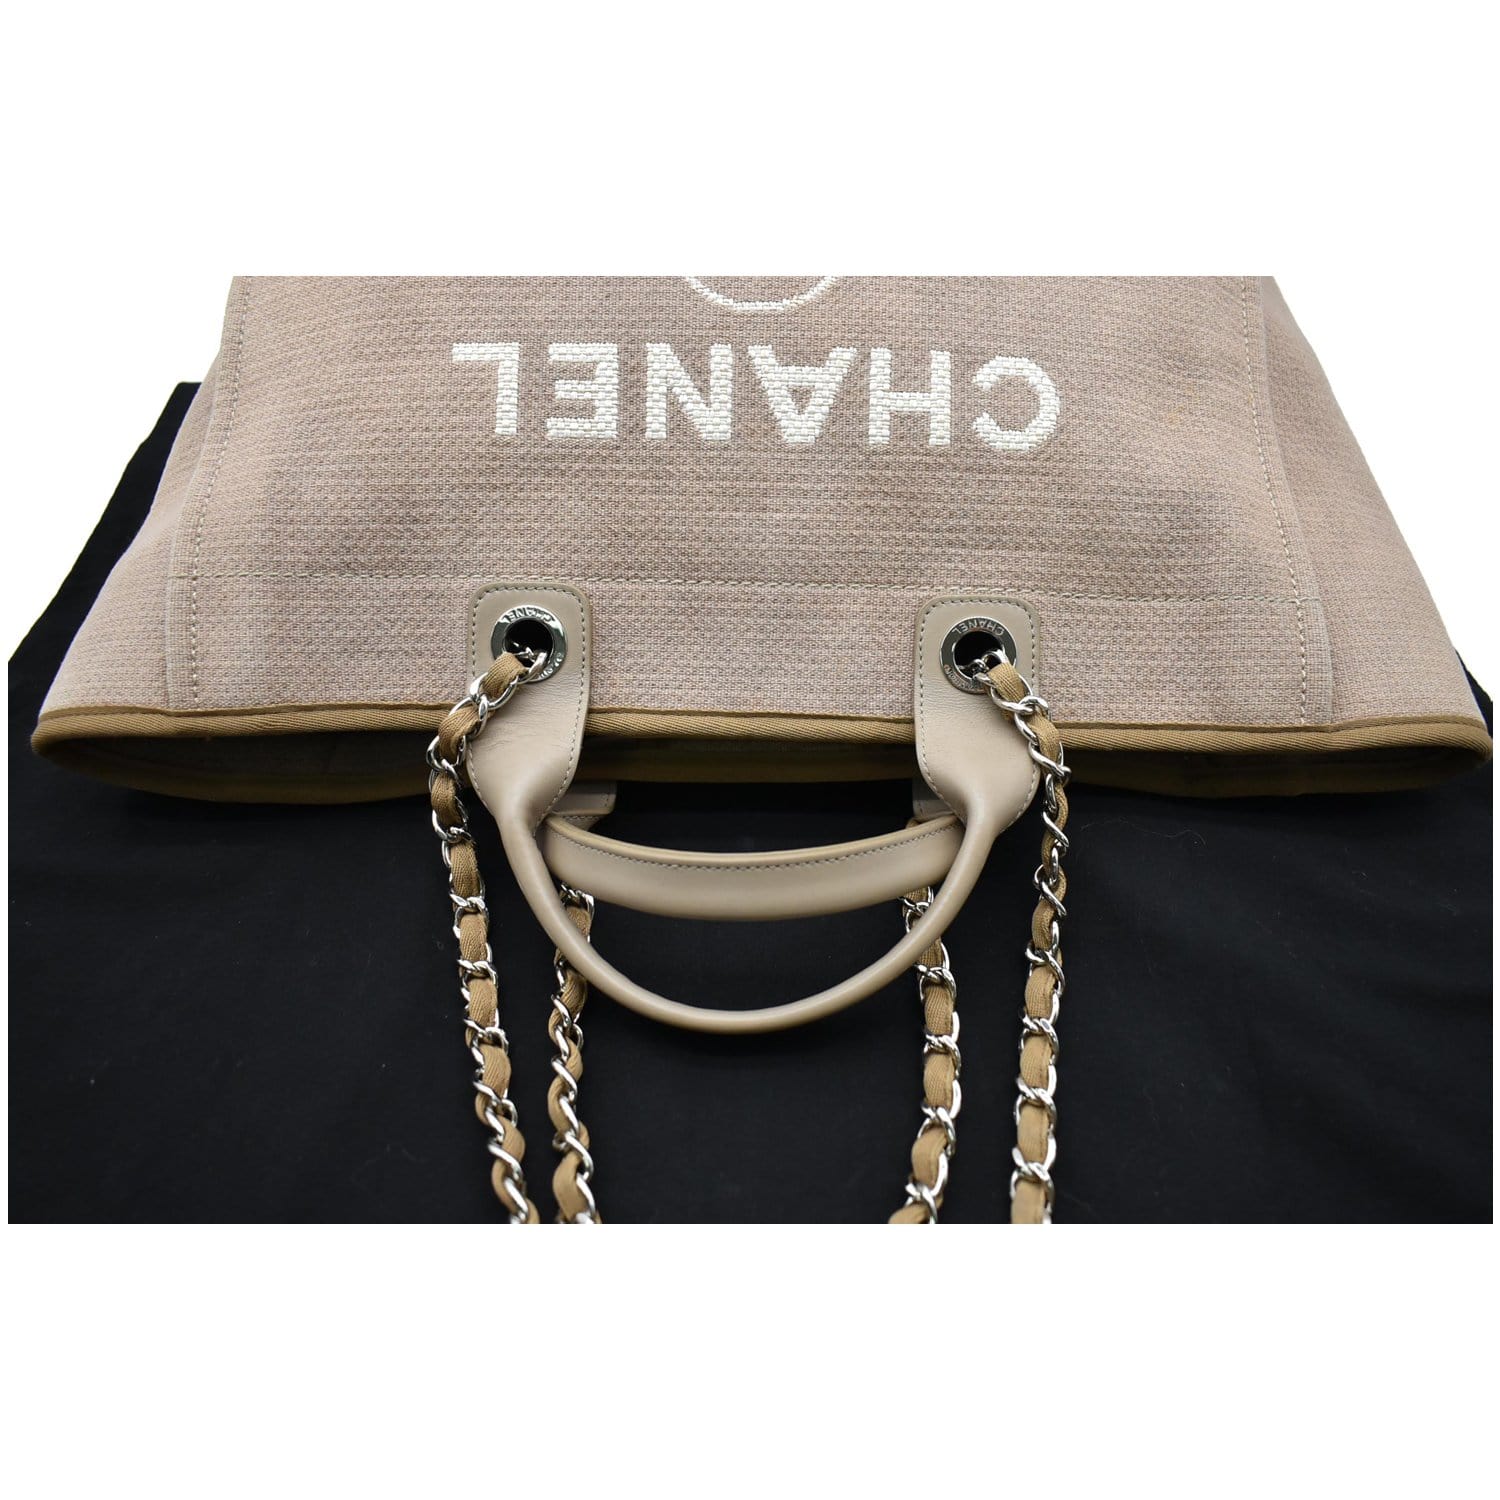 Bonhams : CHANEL BLUE CANVAS DEAUVILLE TOTE WITH SLIVER TONED HARDWARE  (includes serial sticker, original dust bag)